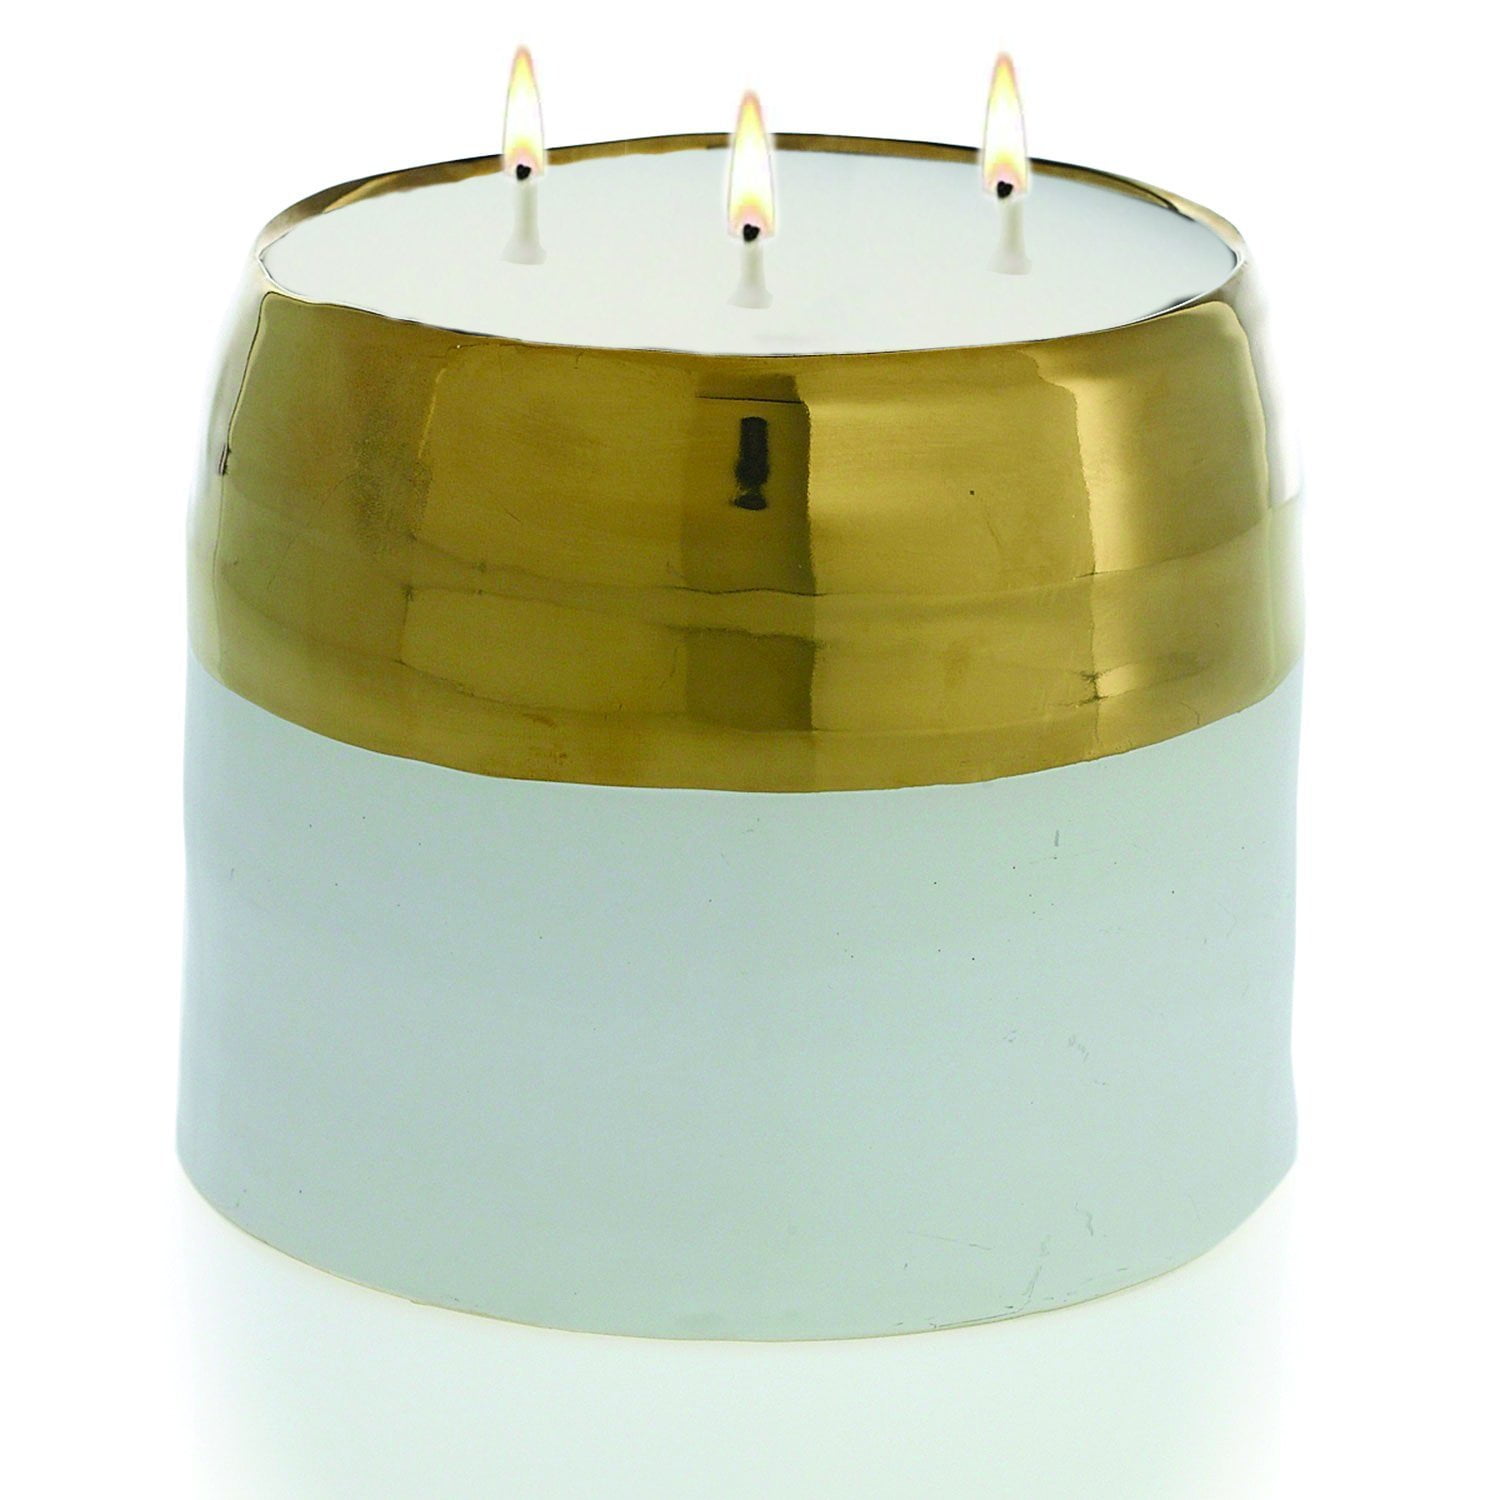 Vruchtbaar het is mooi Glimmend White and Gold Claire Pot Ceramic Candle - Walmart.com